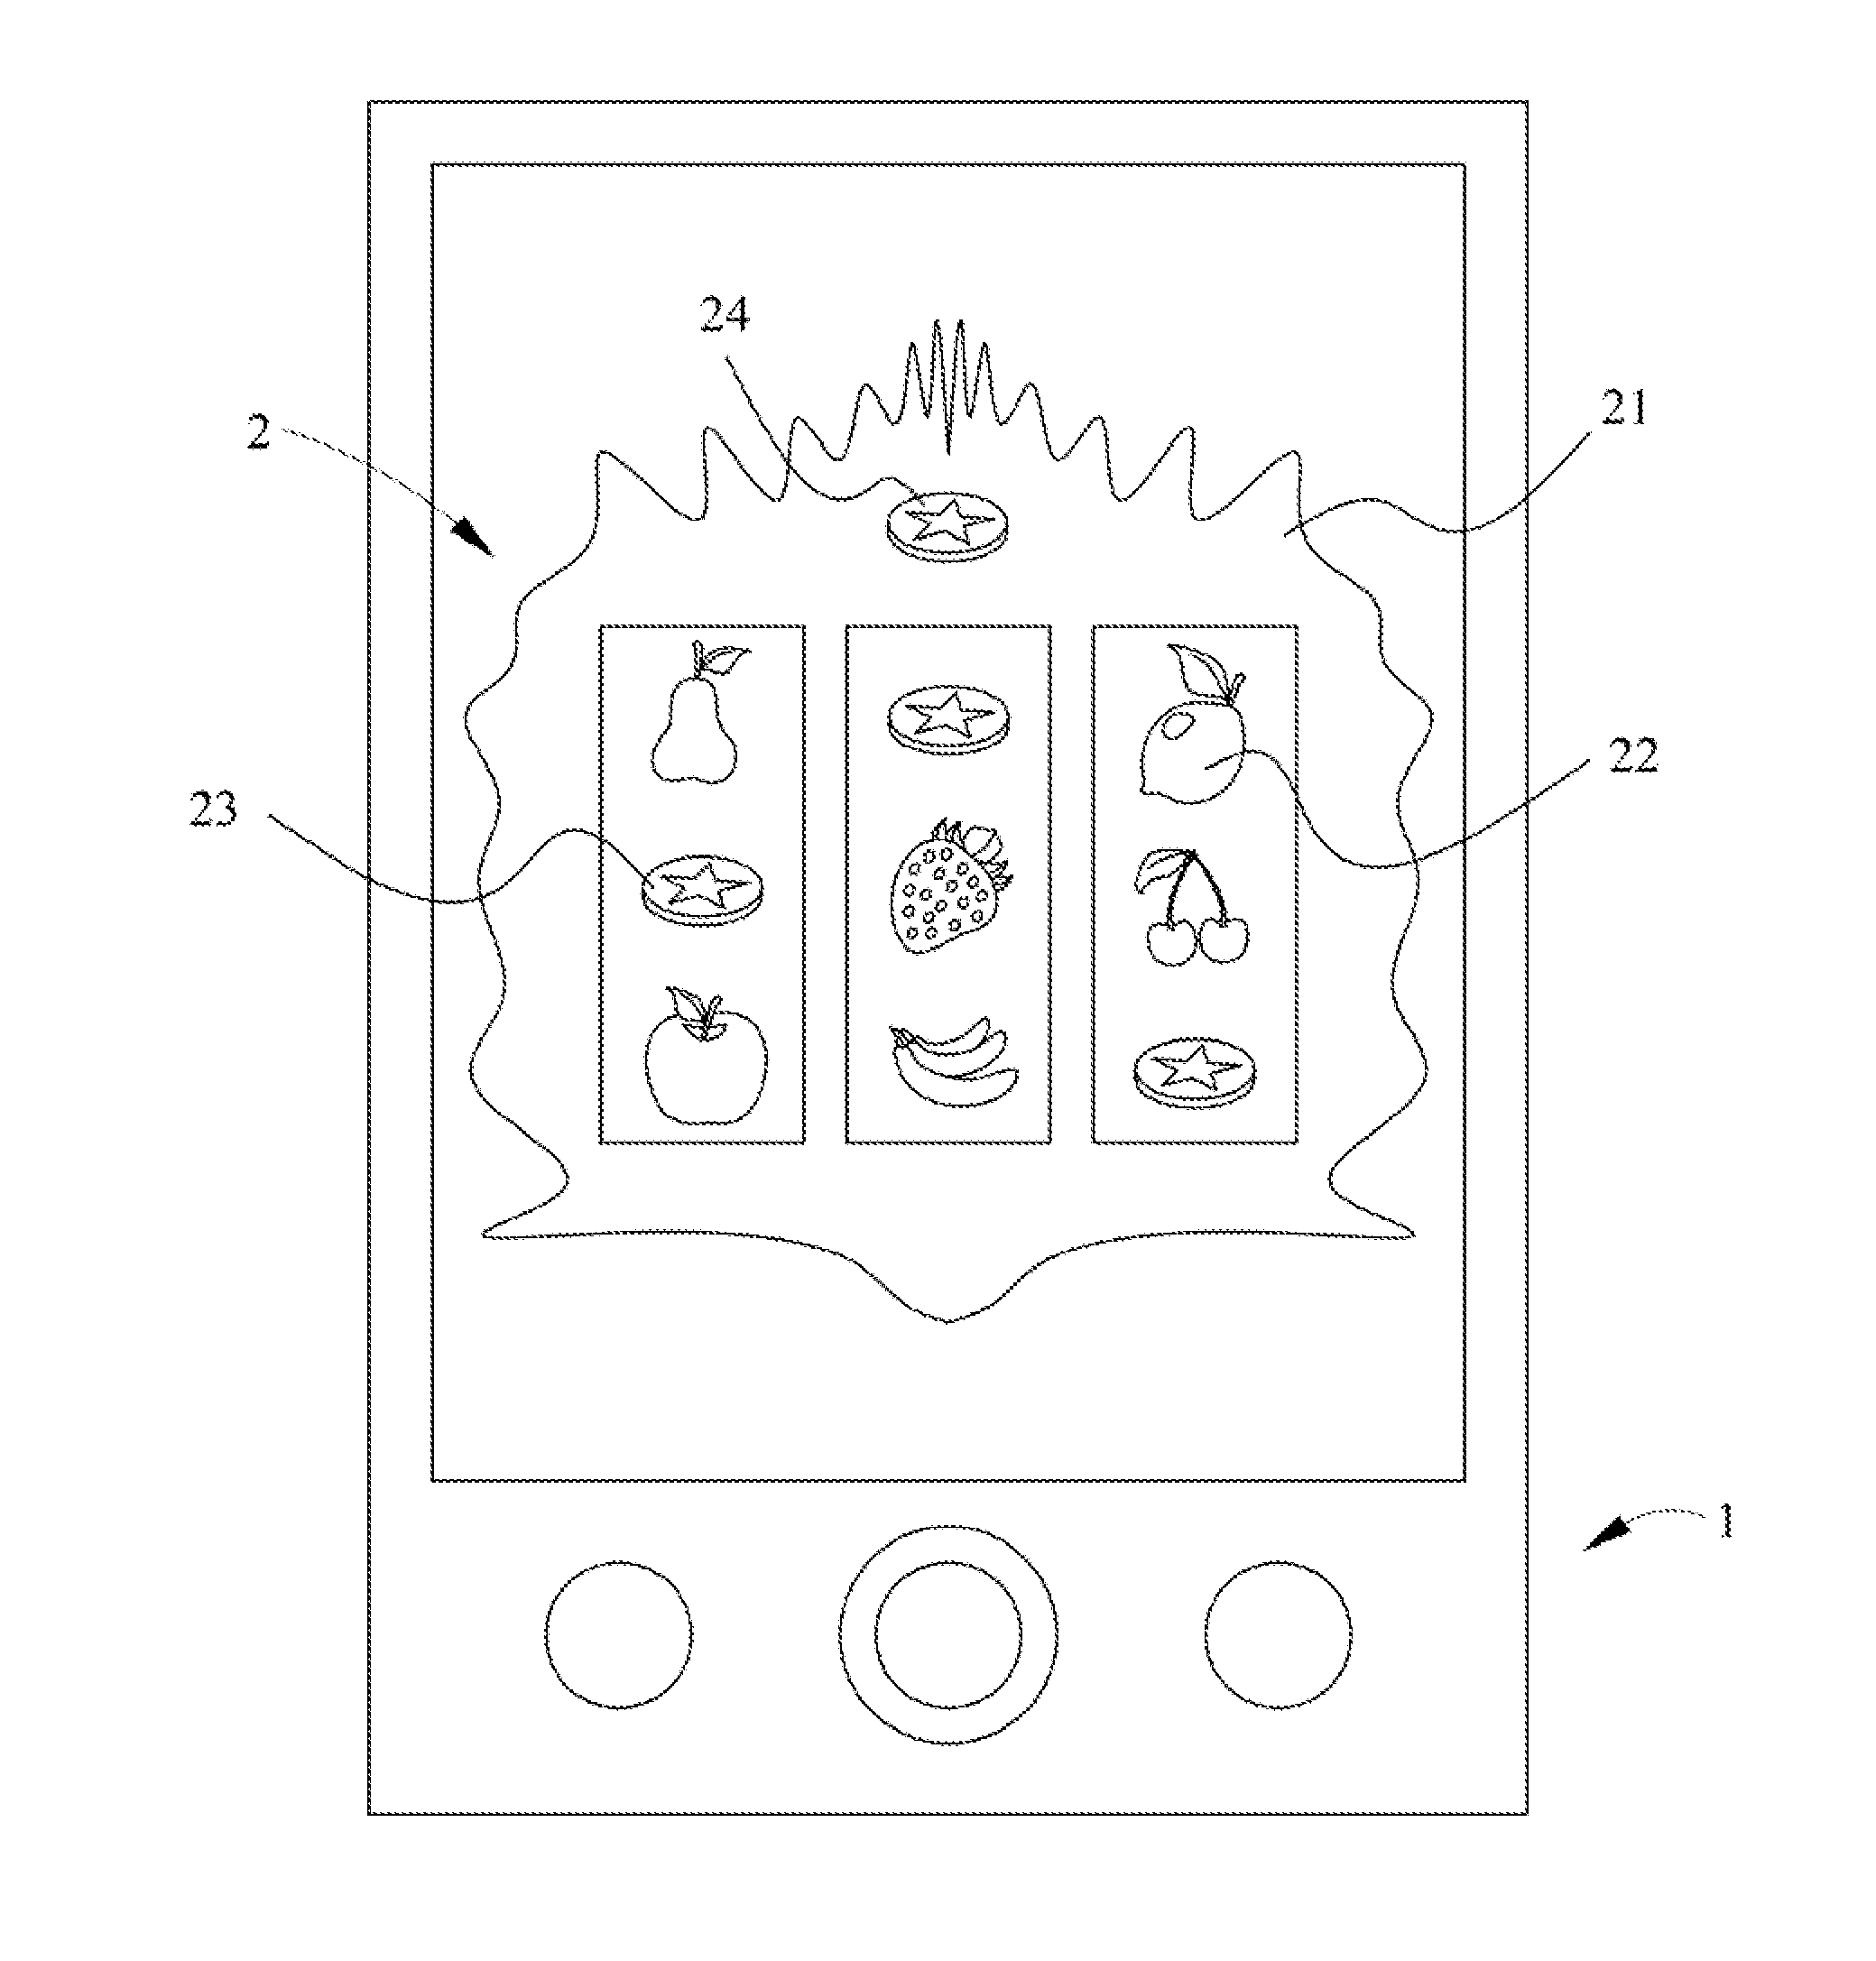 Advertising method combining game software in a mobile device